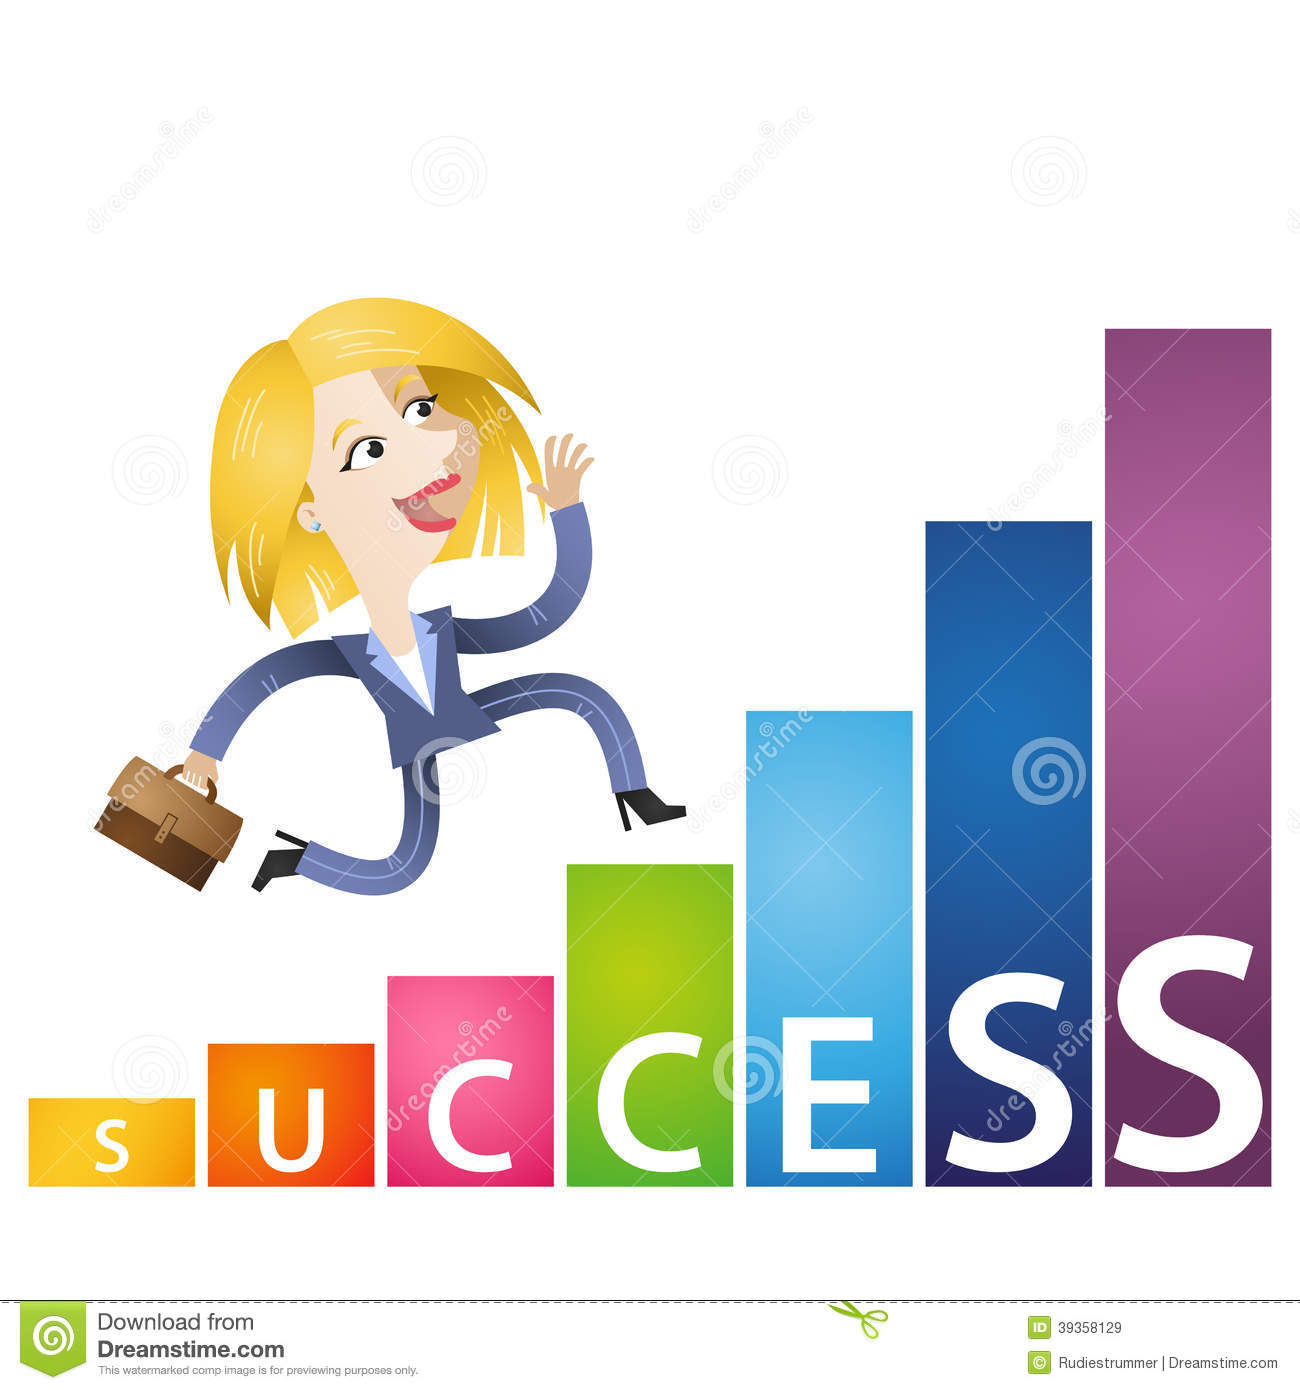 Success clipart successful person free on jpg